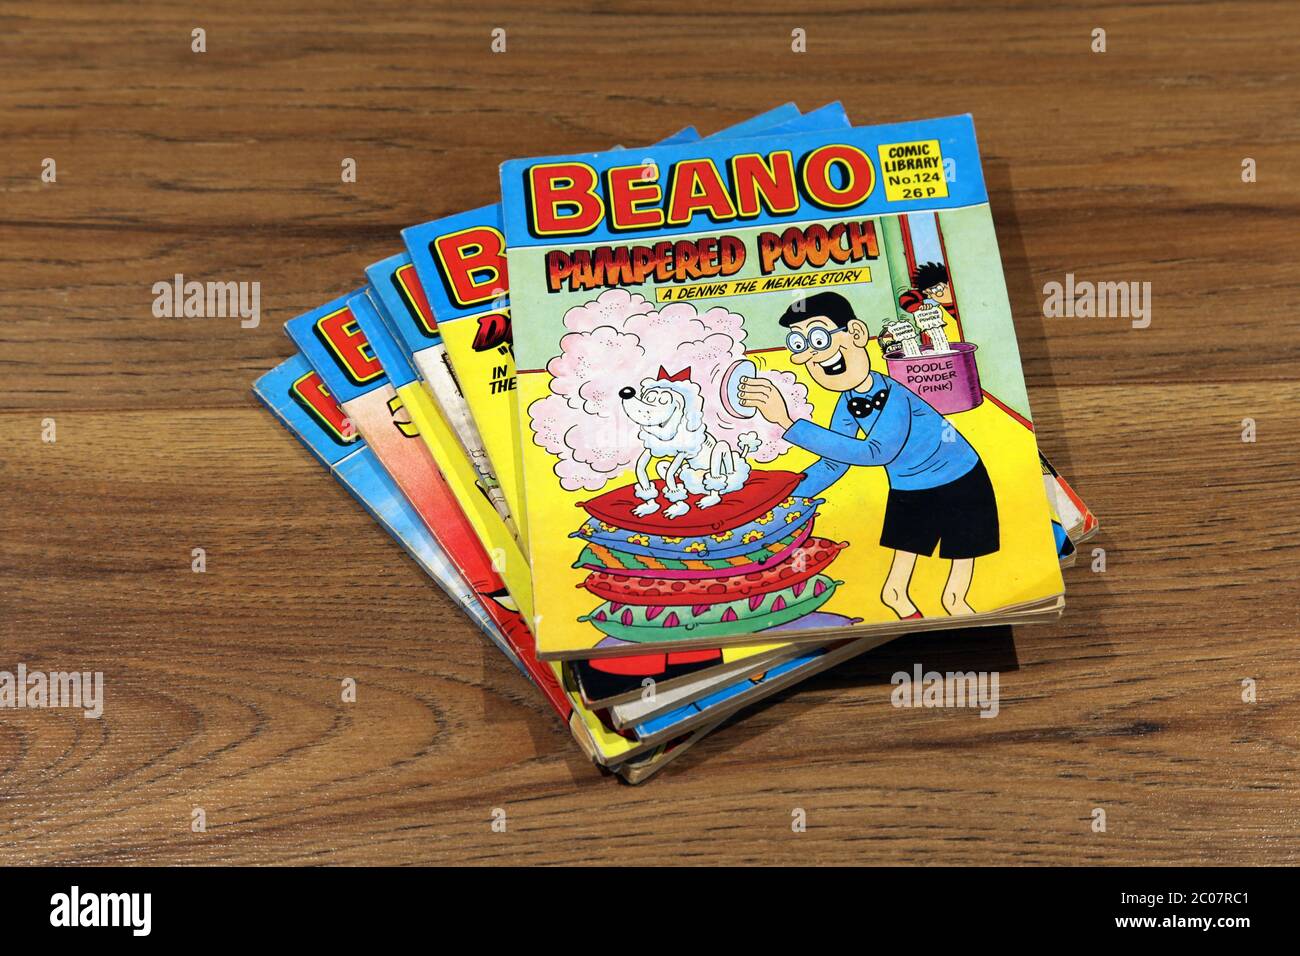 Beano Comic Library No.124 1987 'Pampered Pooch, A Dennis the Menace Story' stacked in a pile of Beano comics Stock Photo